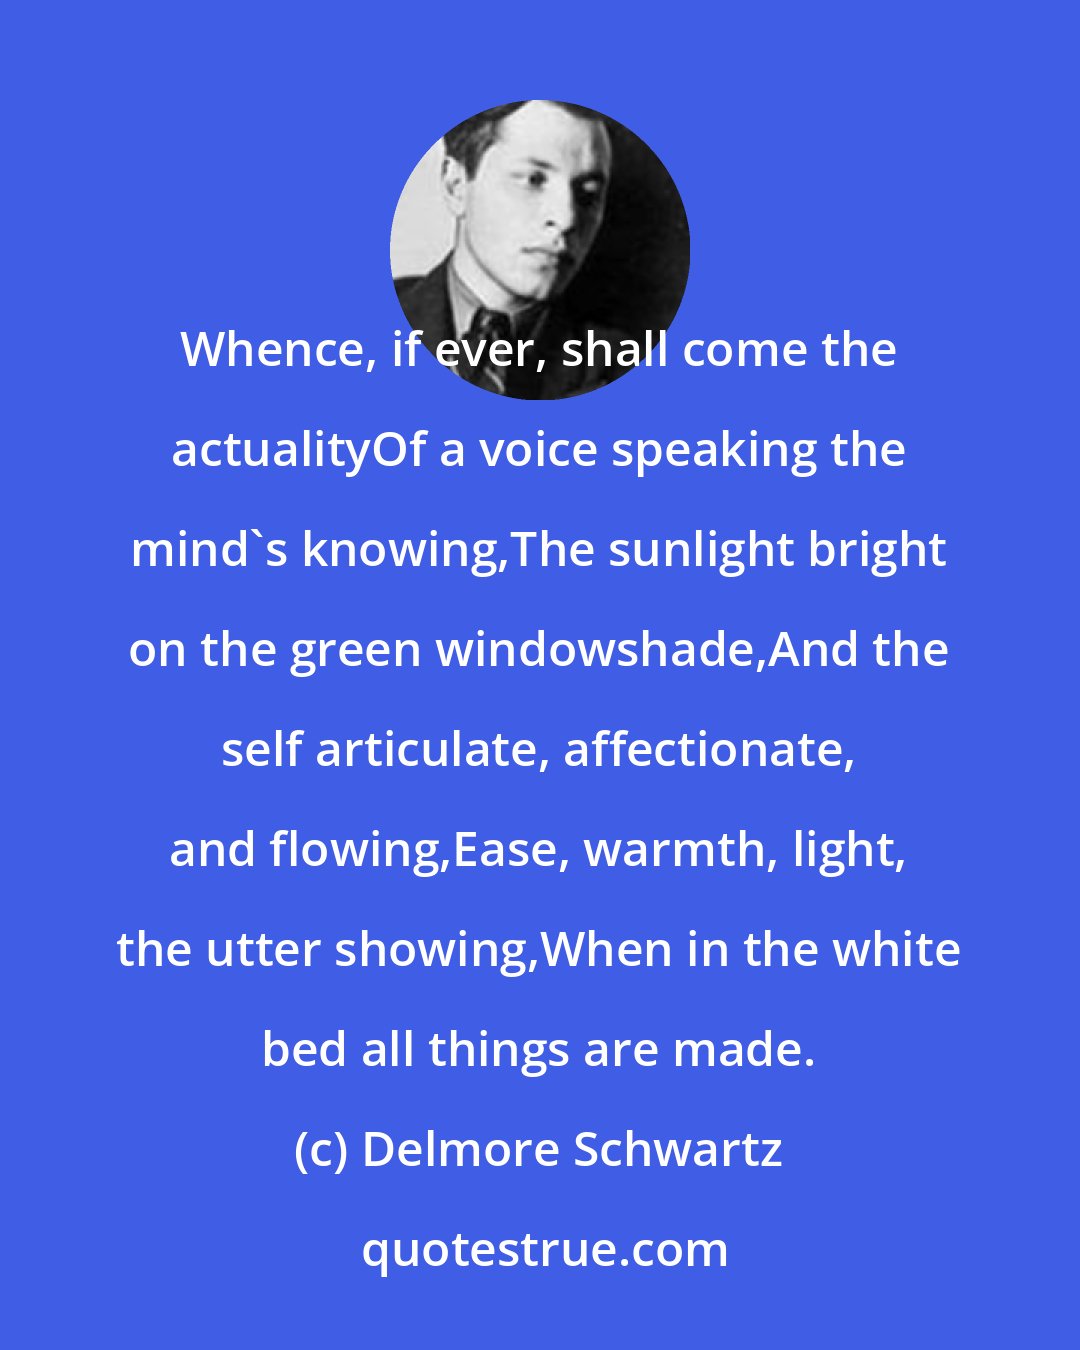 Delmore Schwartz: Whence, if ever, shall come the actualityOf a voice speaking the mind's knowing,The sunlight bright on the green windowshade,And the self articulate, affectionate, and flowing,Ease, warmth, light, the utter showing,When in the white bed all things are made.